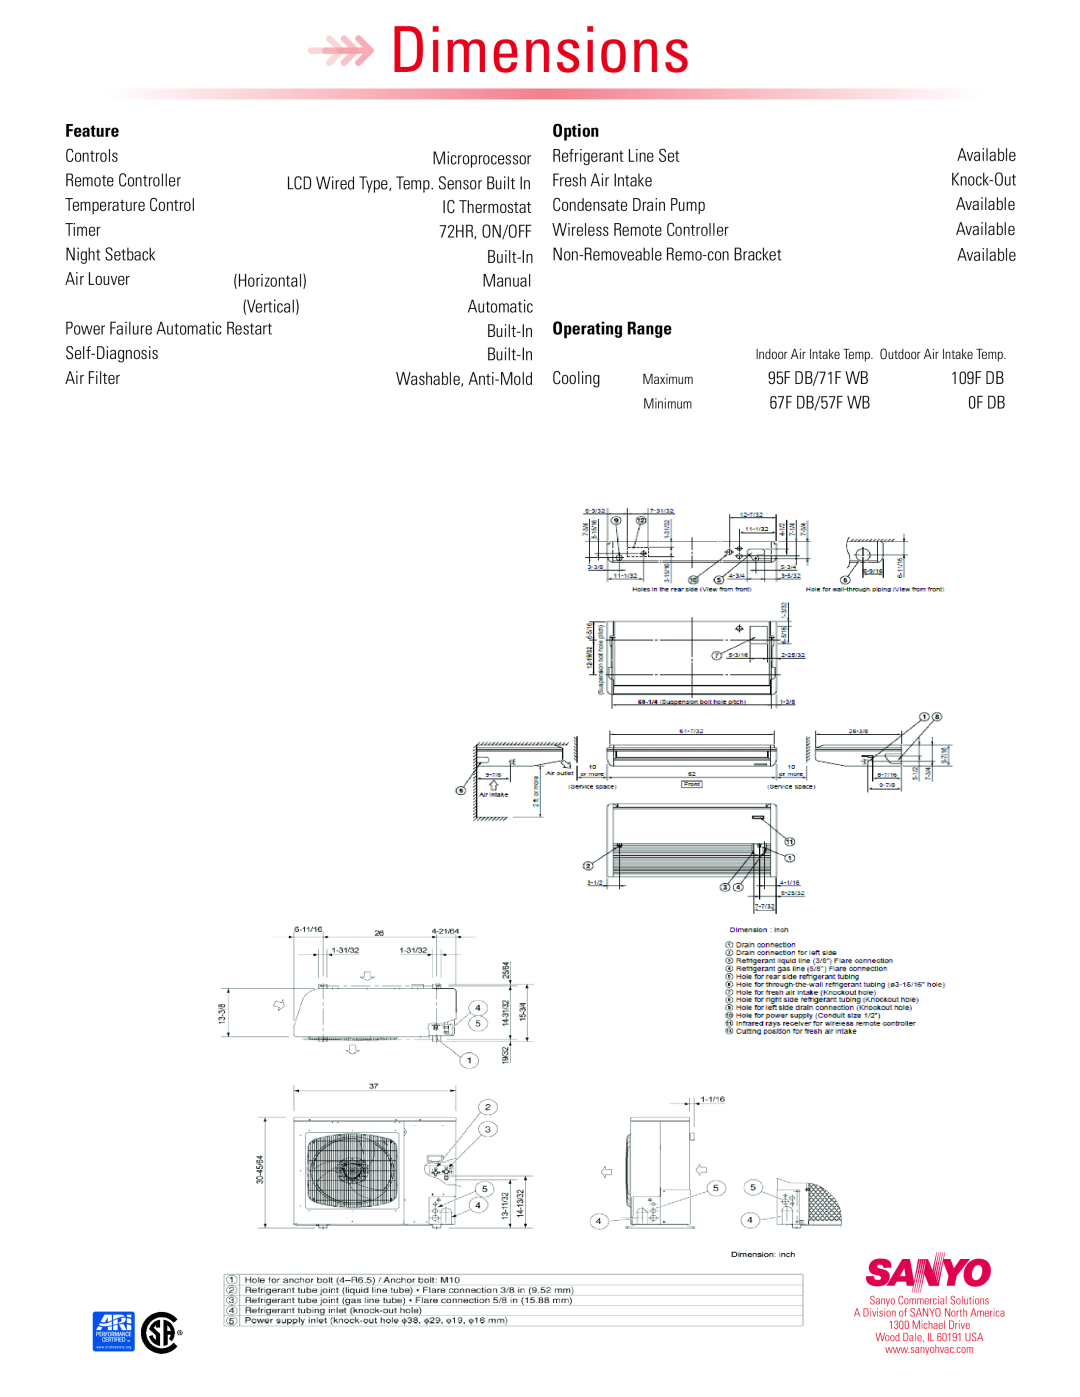 Sanyo THW4272R dimensions Dimensions, Feature, Option, Operating Range 